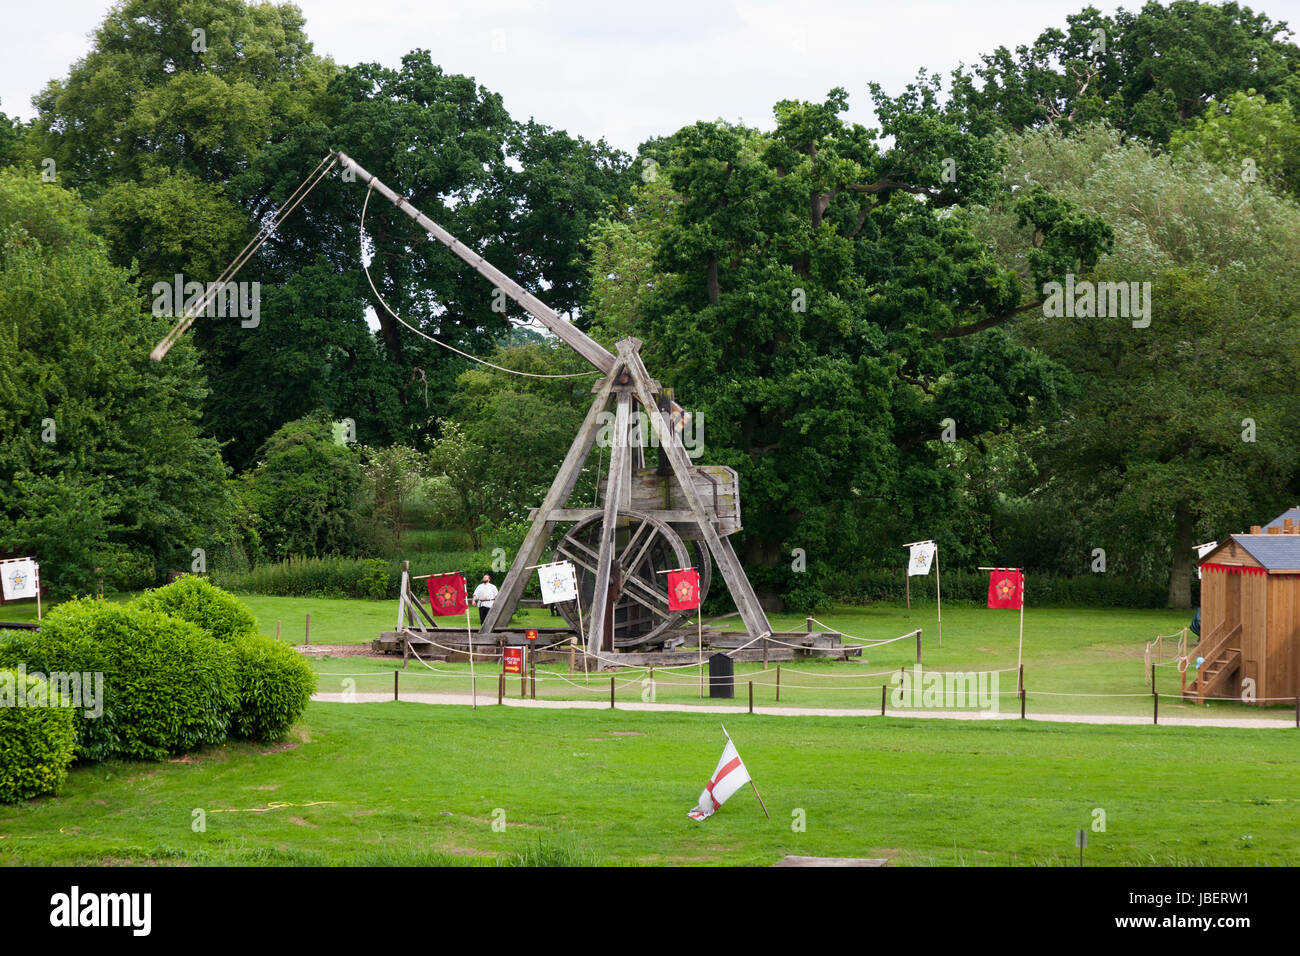 The moment of release: a reproduction Trebuchet siege engine machine 'fires' an object many metres. Warwick castle, Warwick, UK. (88) Stock Photo